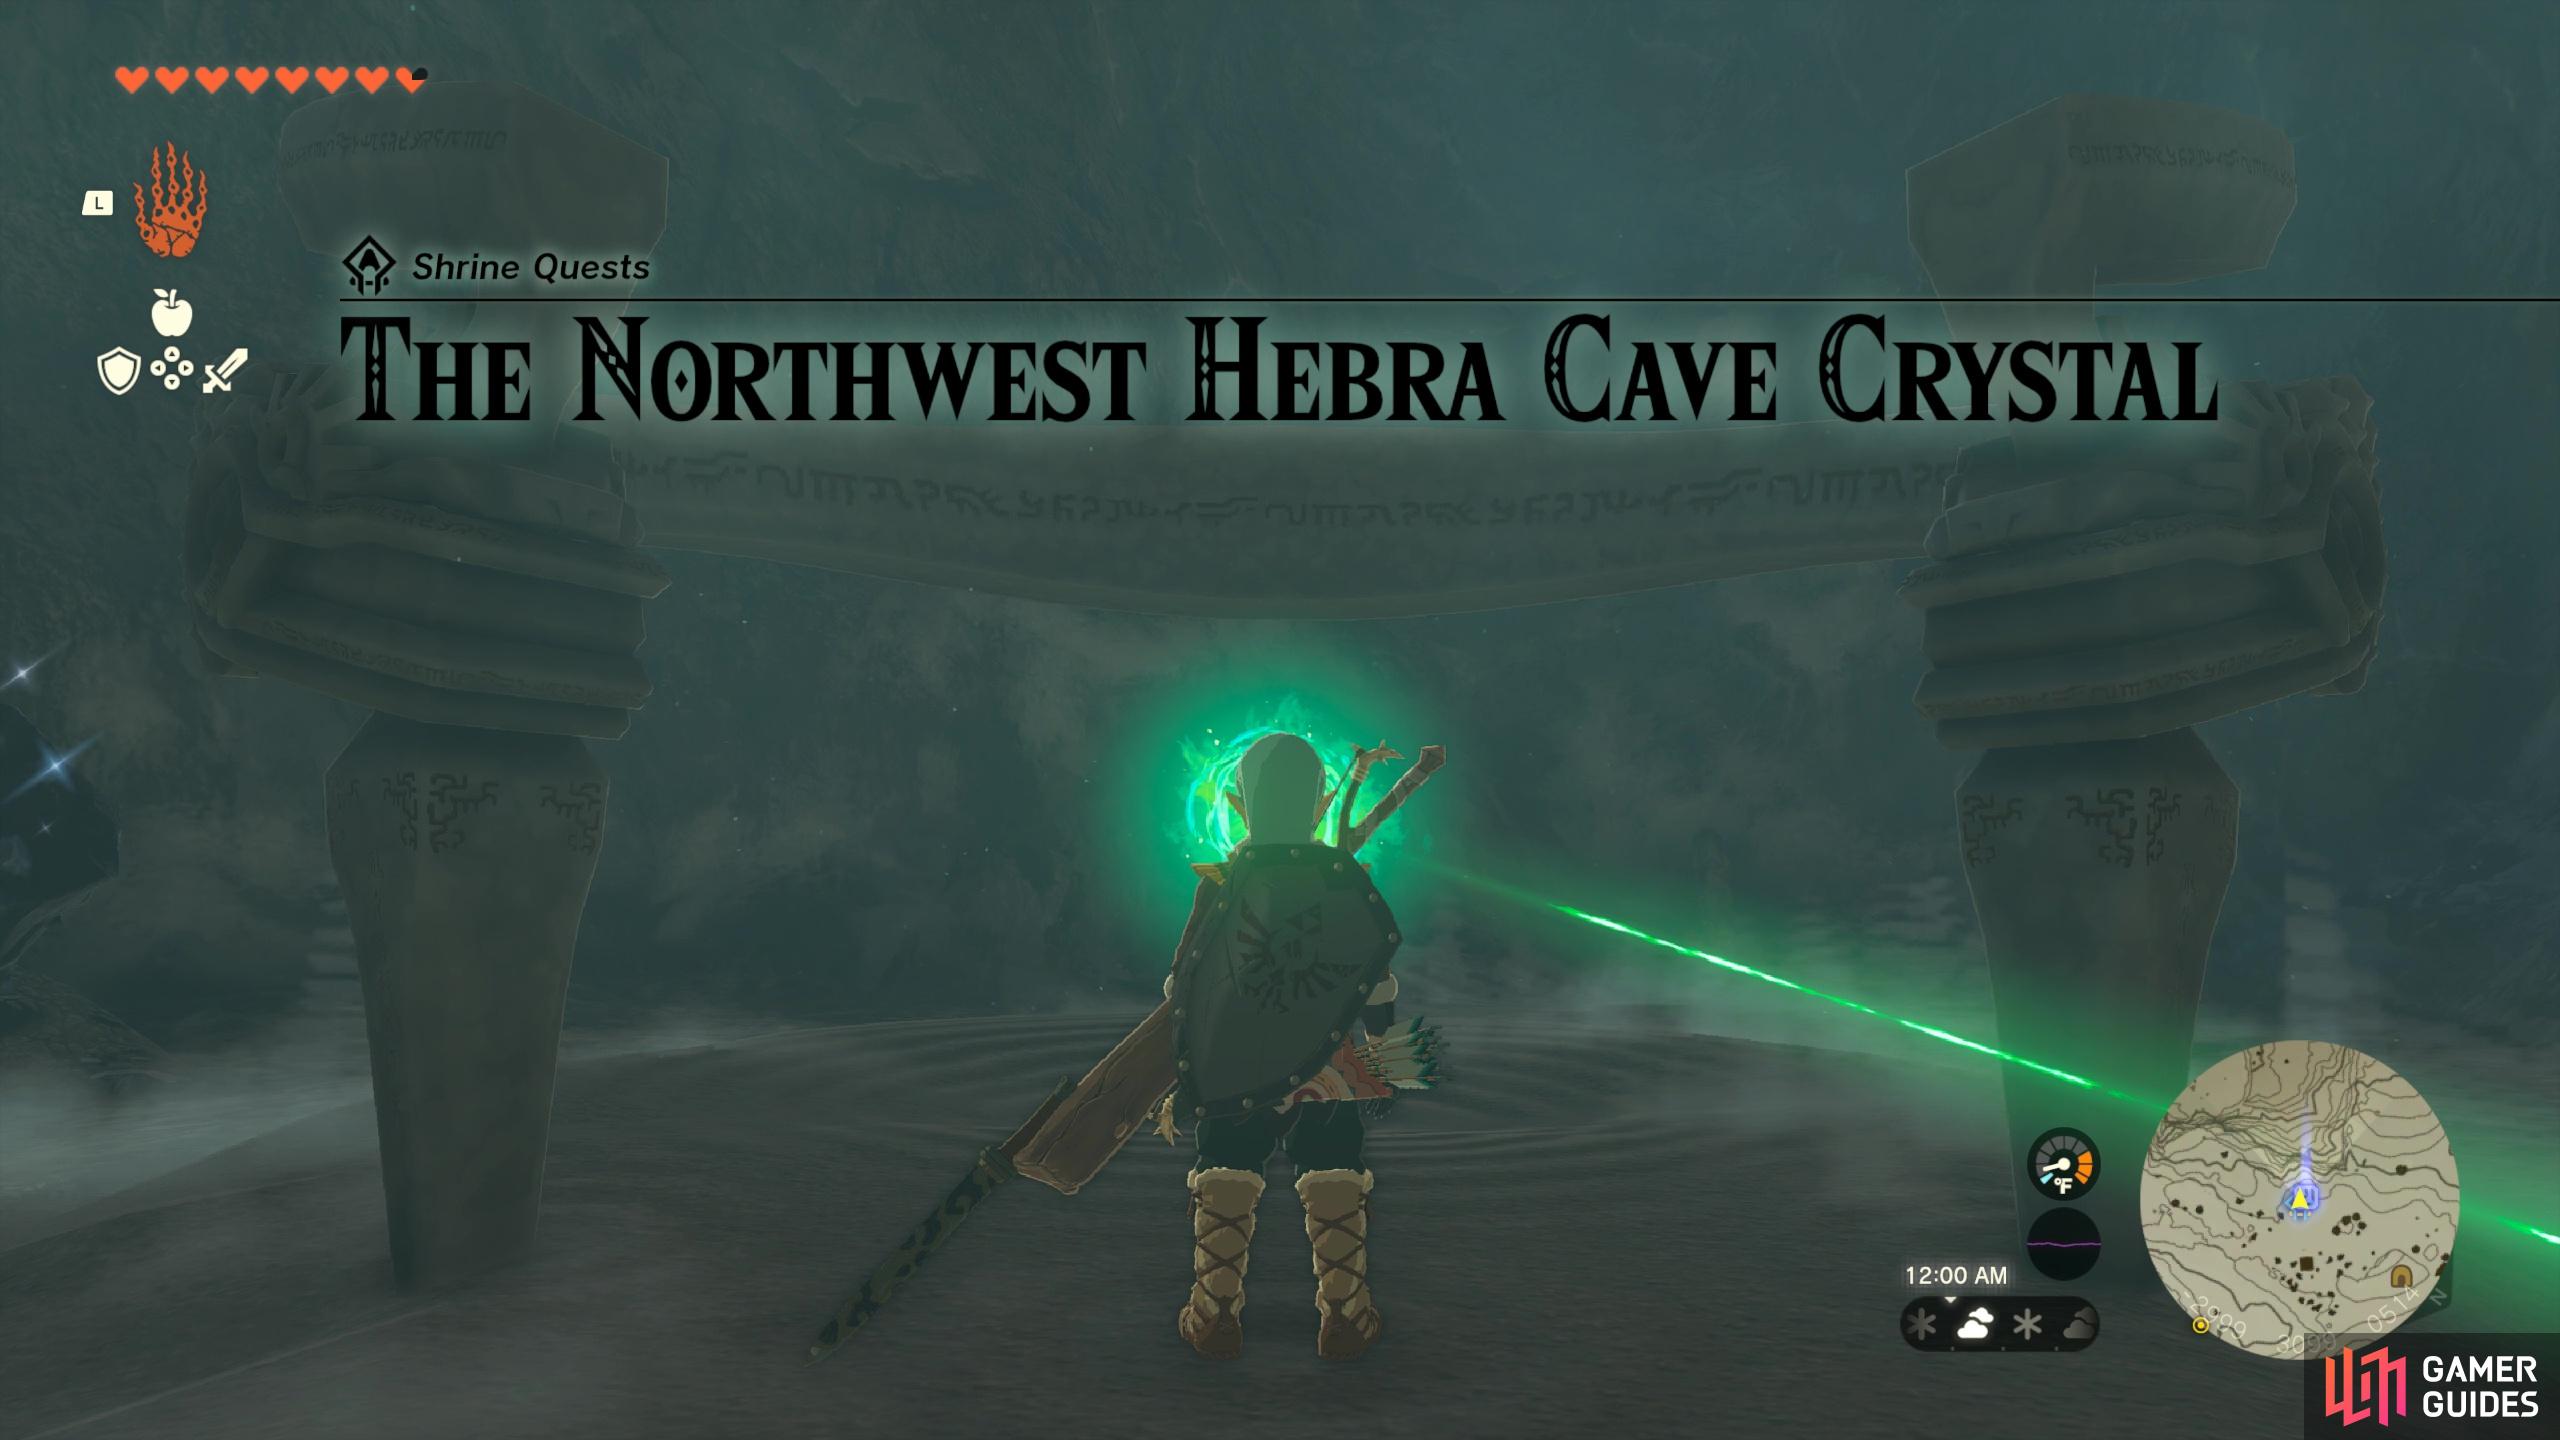 To unlock Rutafu-Um Shrine, you’ll need to complete Northwest Hebra Cave Crystal Shrine Quest first.